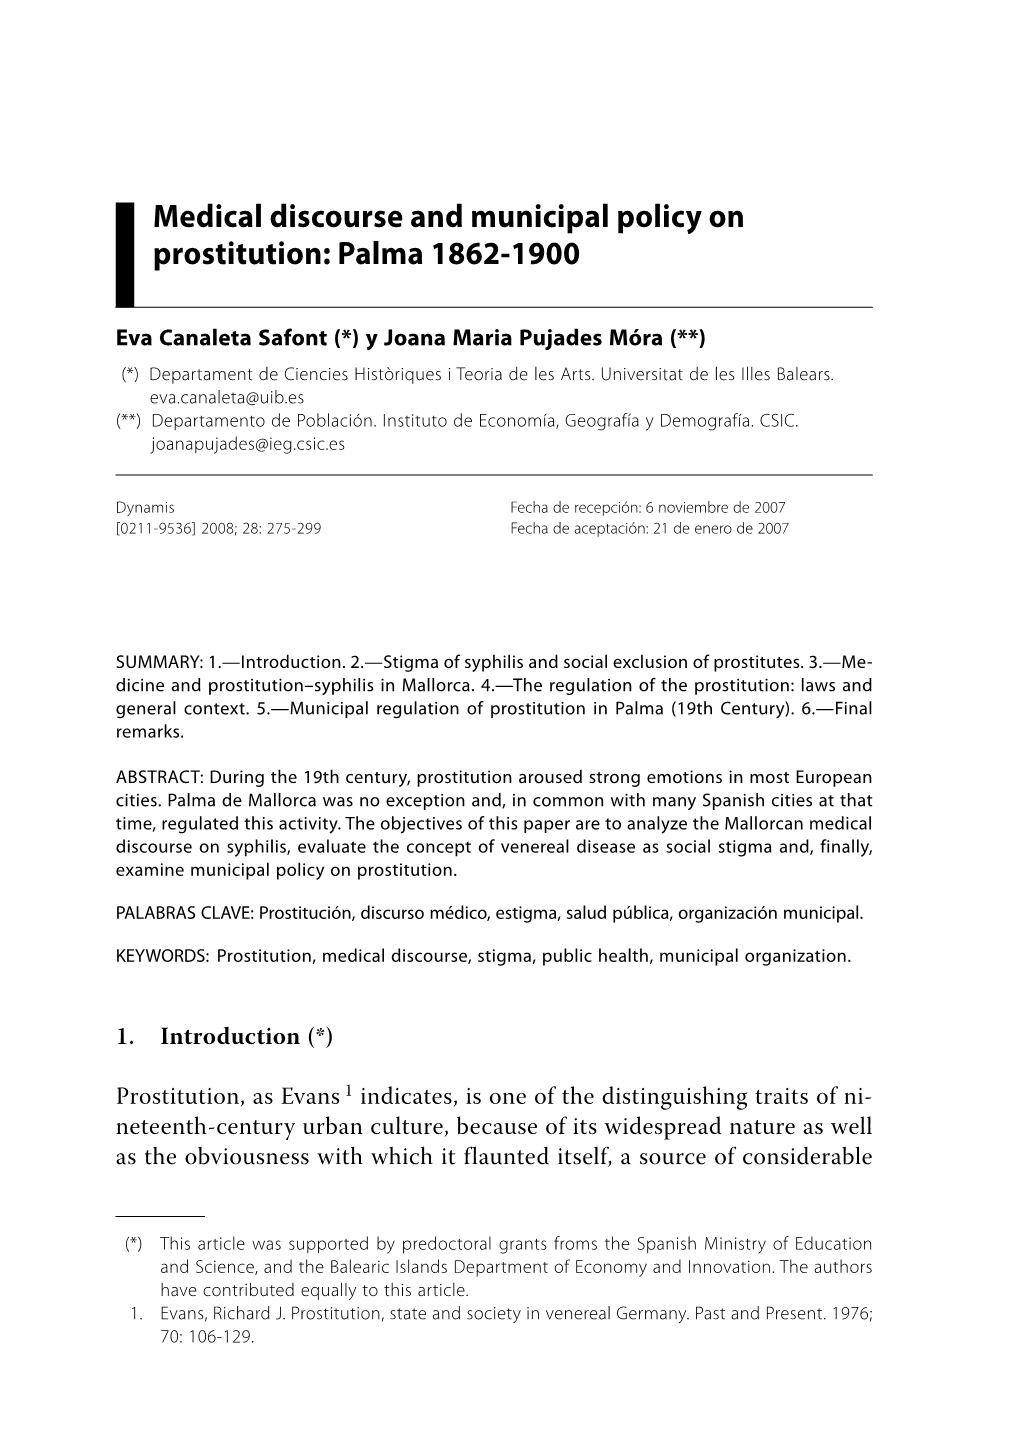 Medical Discourse and Municipal Policy on Prostitution: Palma 1862-1900